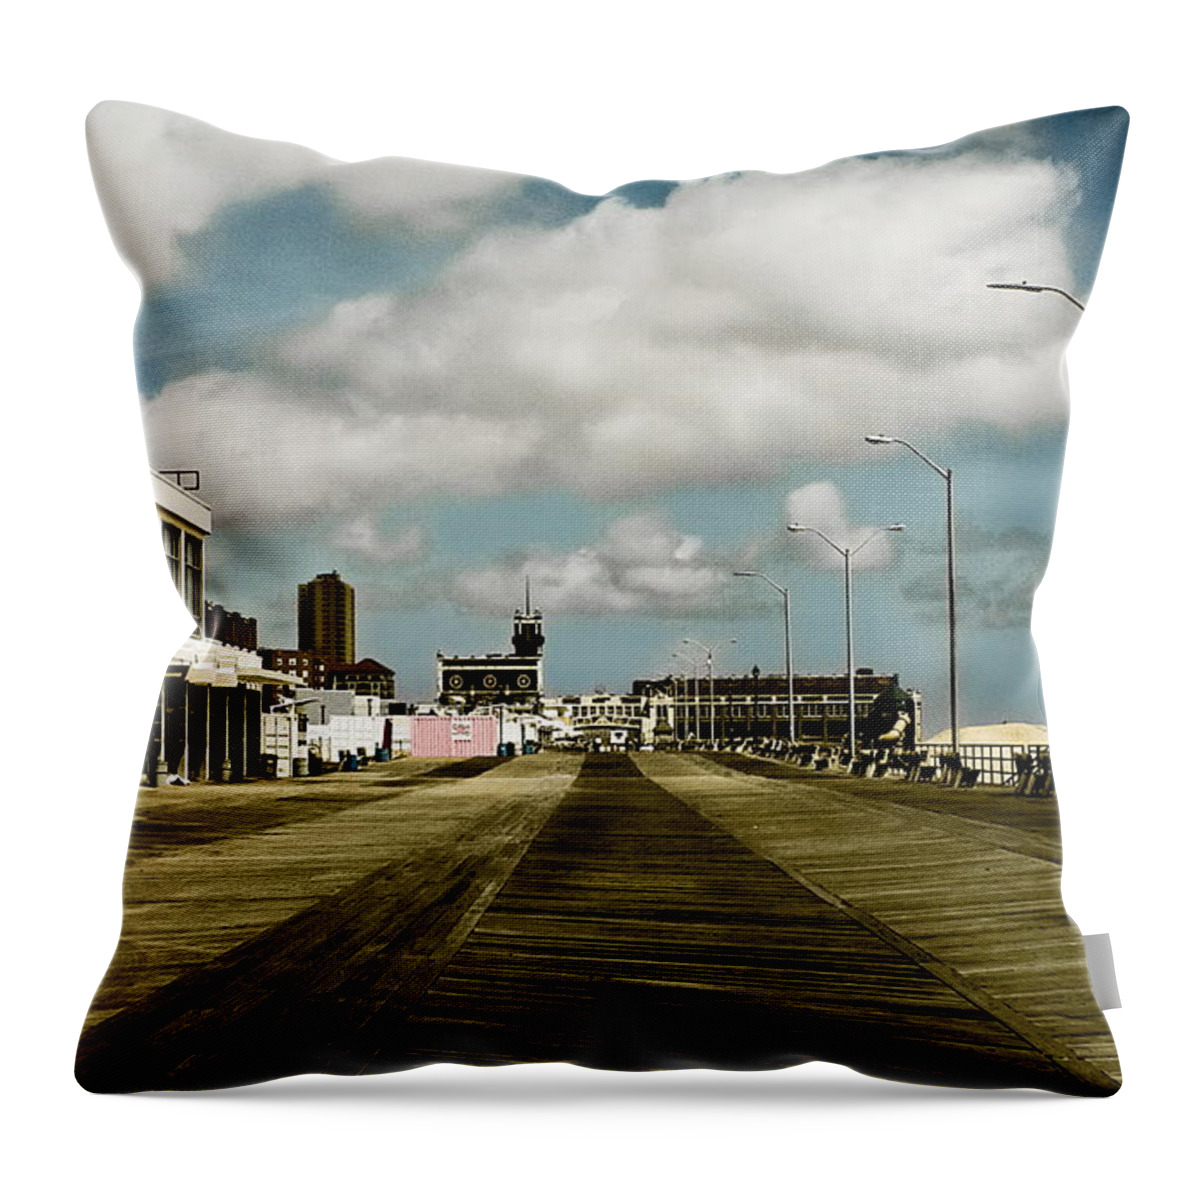 Boardwalks Throw Pillow featuring the photograph Clouds Over the Boardwalk by Colleen Kammerer